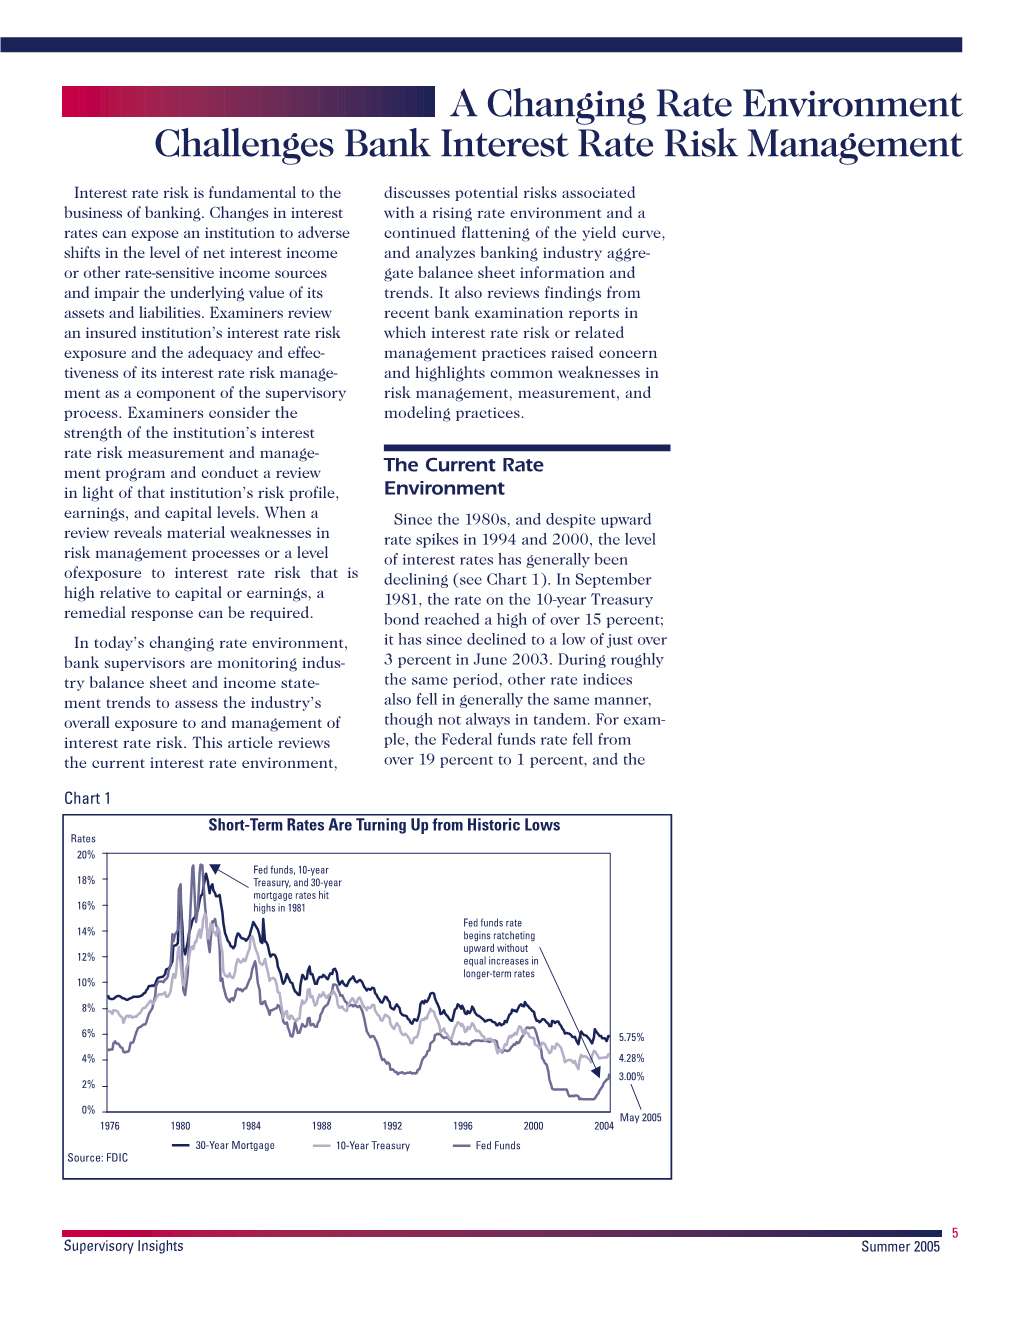 A Changing Rate Environment Challenges Bank Interest Rate Risk Management